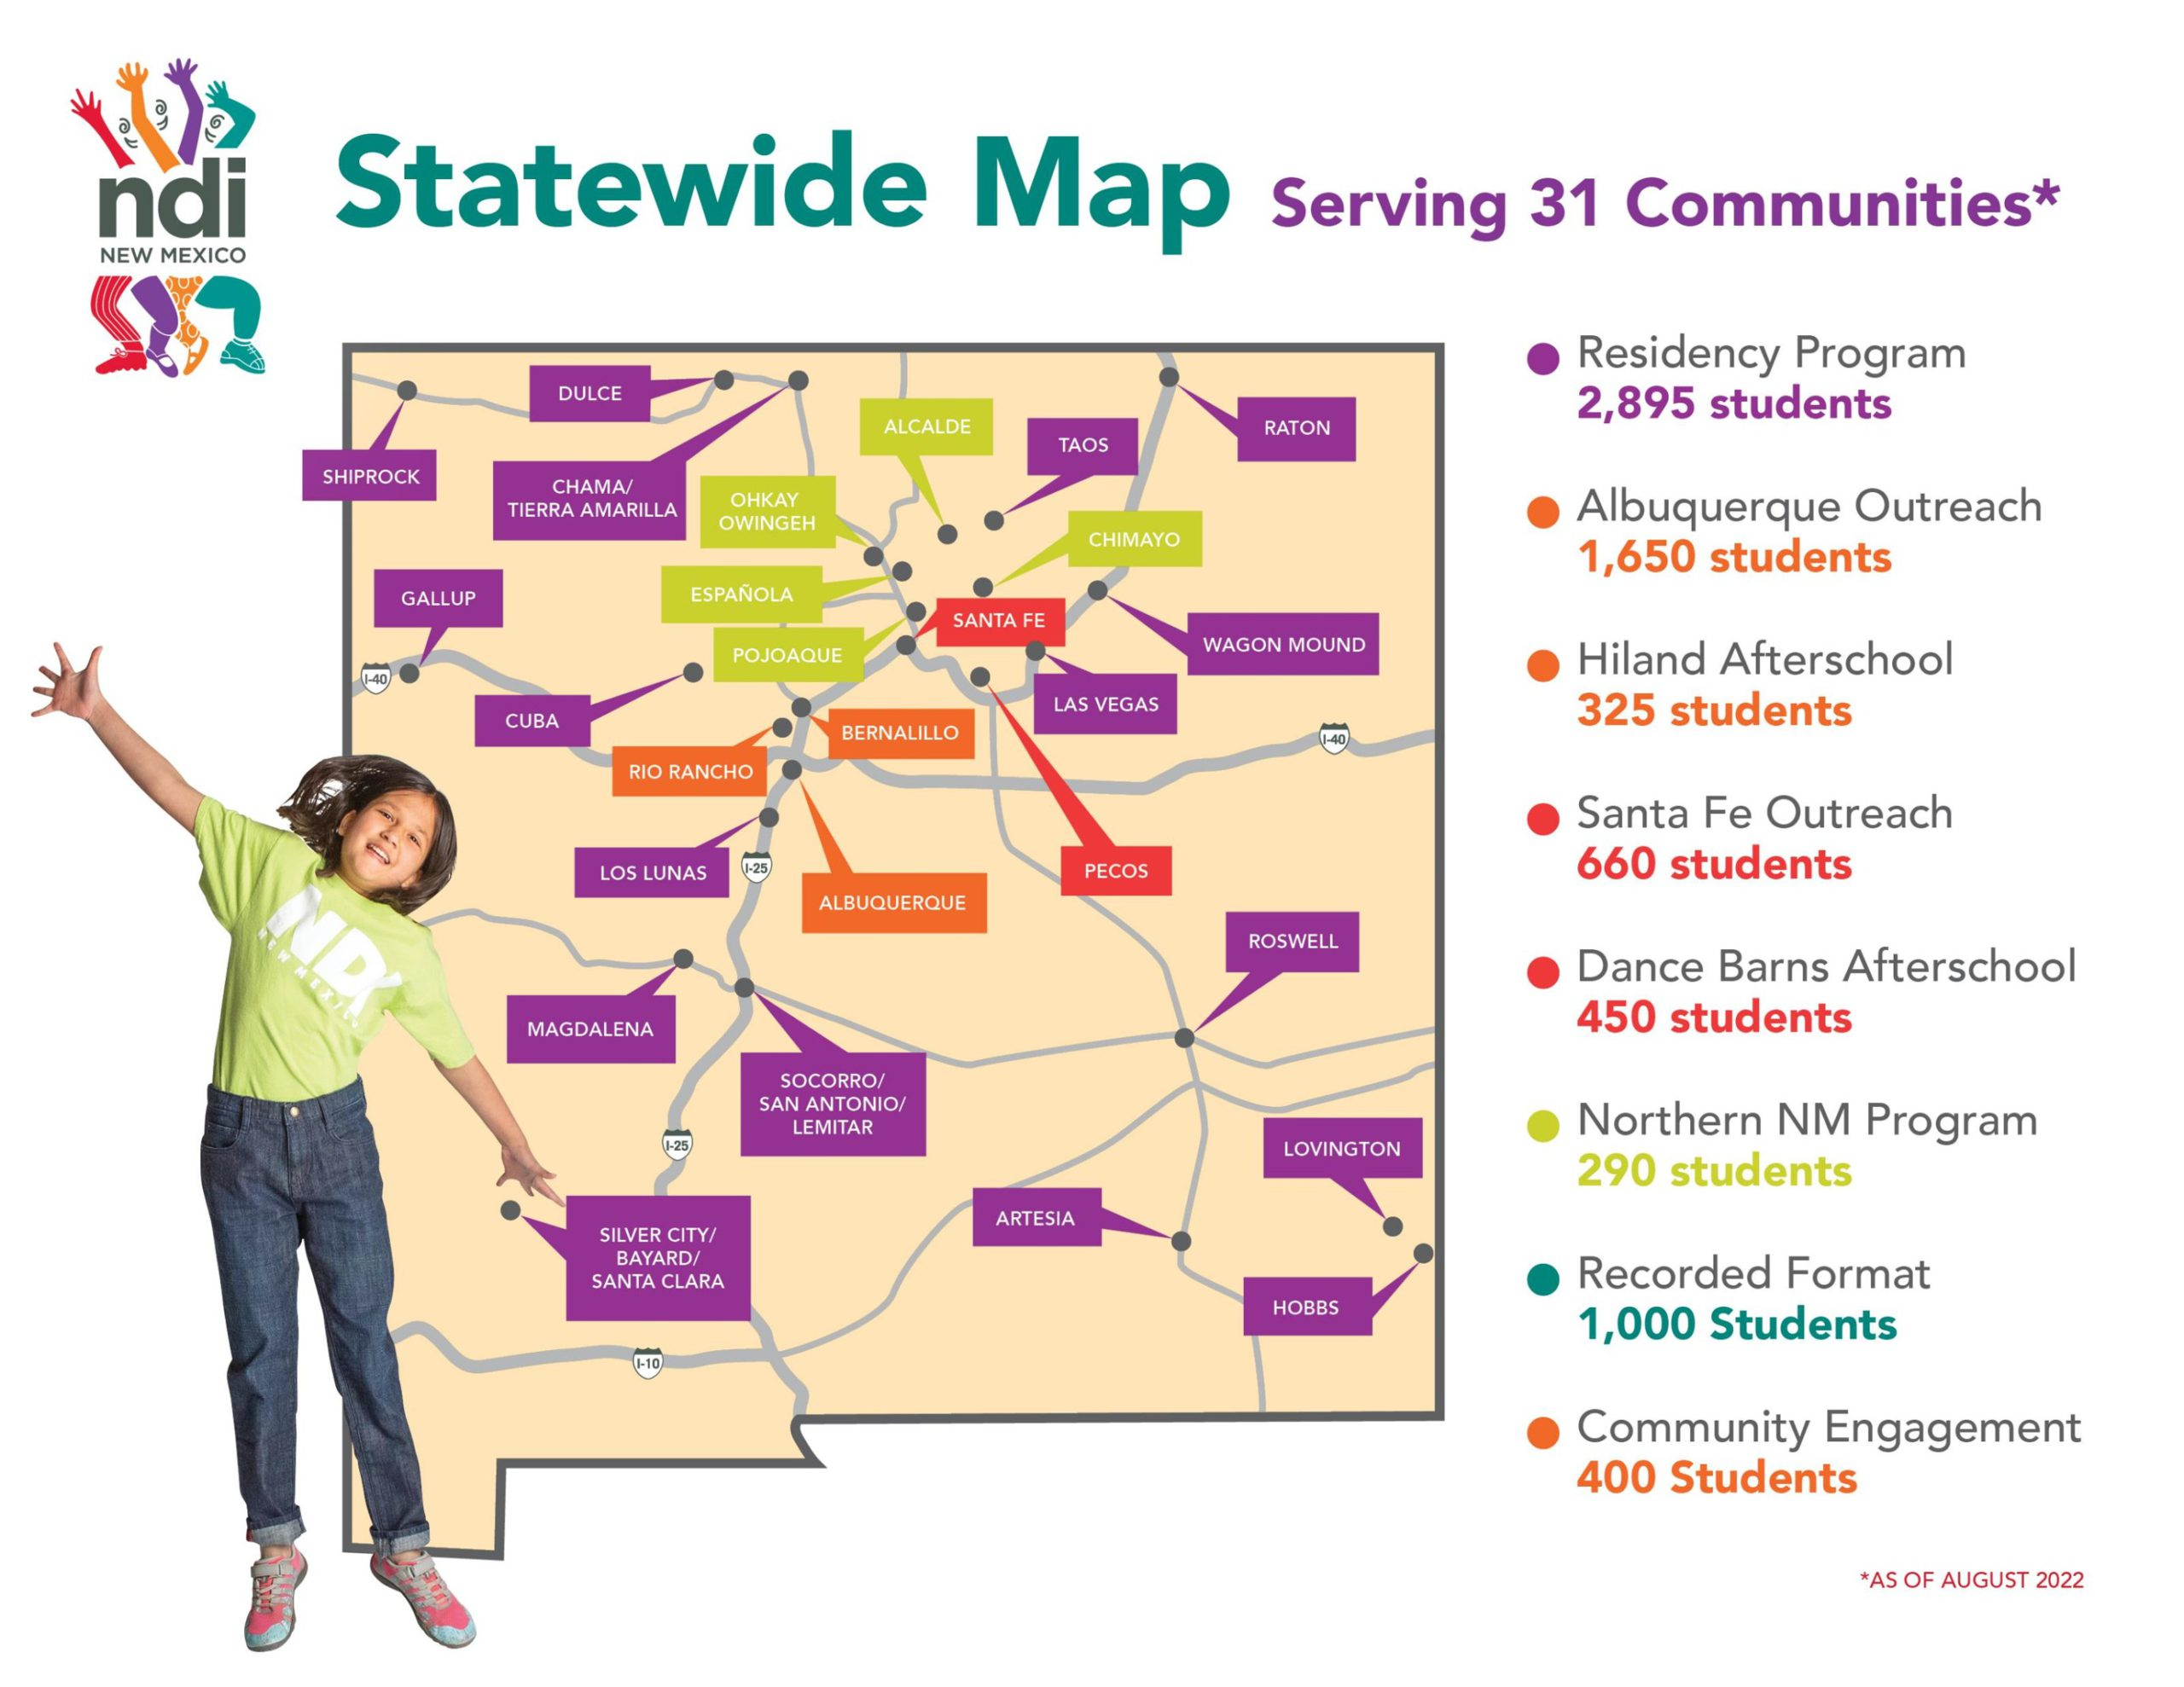 New Mexico State Map: NDI New Mexico Dance Programs